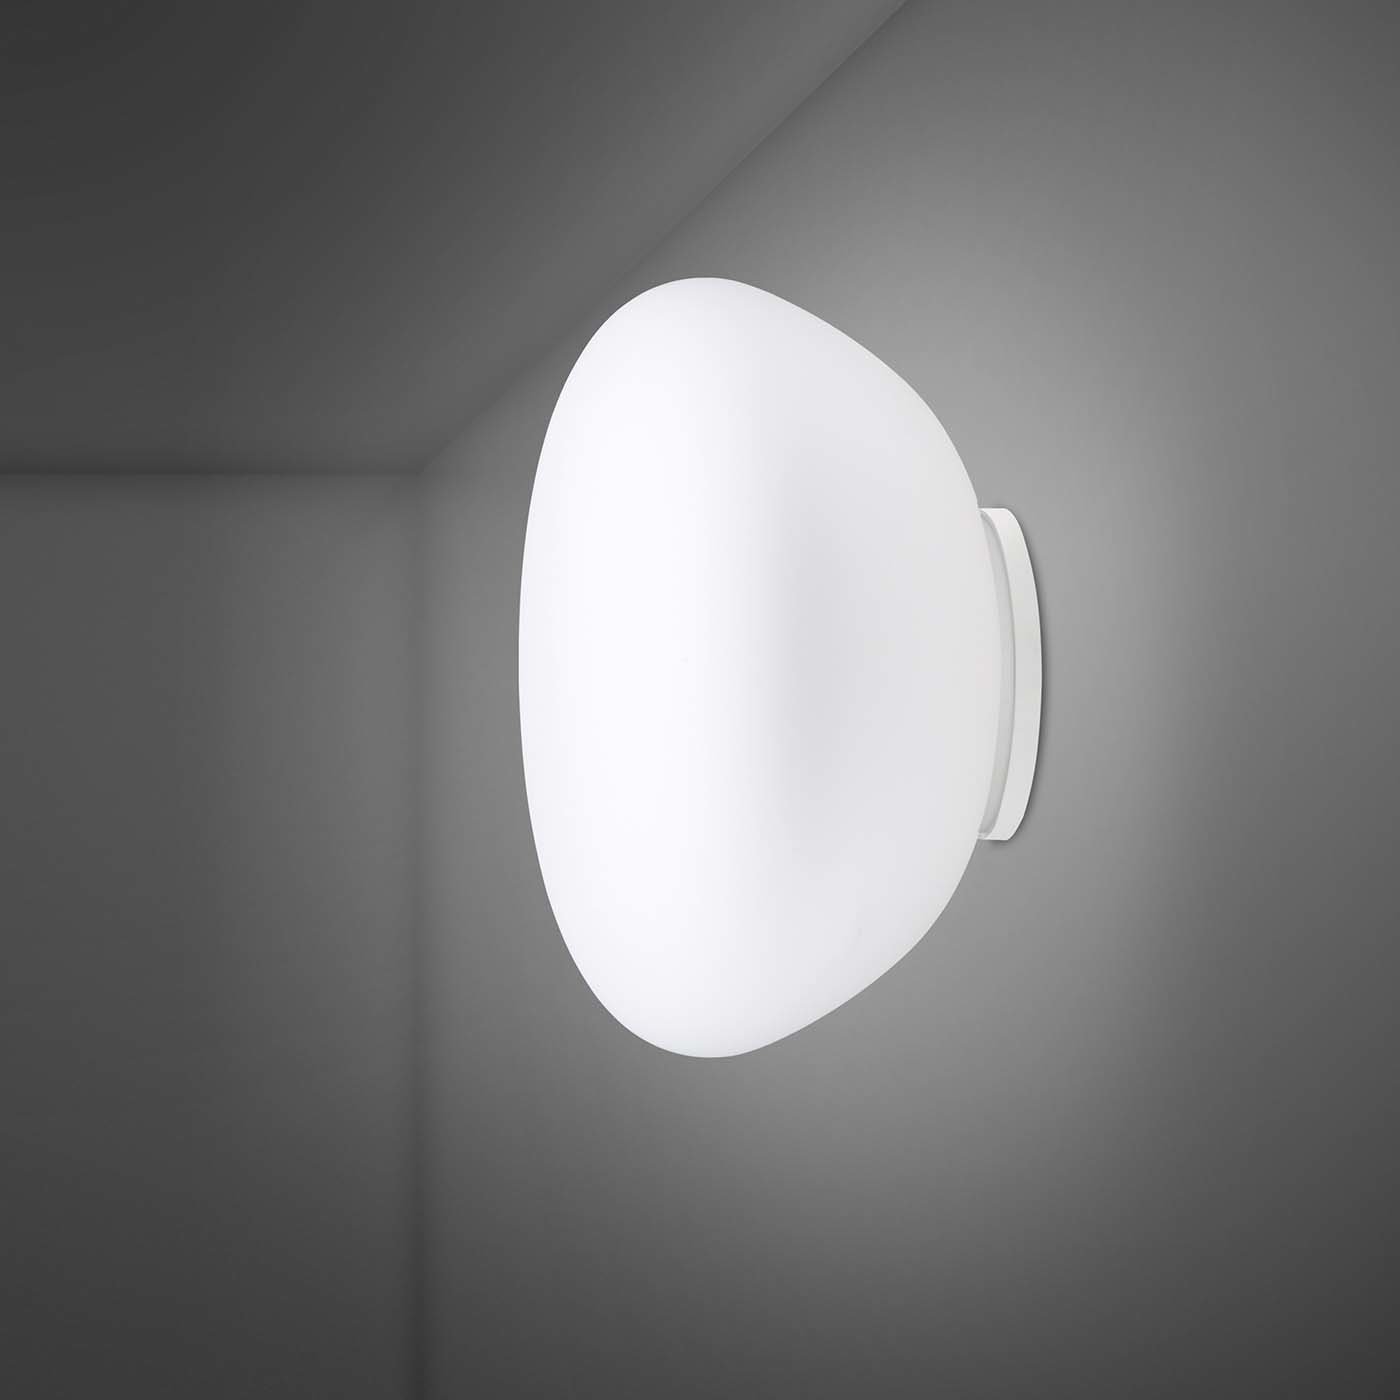 Lumi Poga Wall/Ceiling Lamp by Saggia & Sommella - Alternative view 1